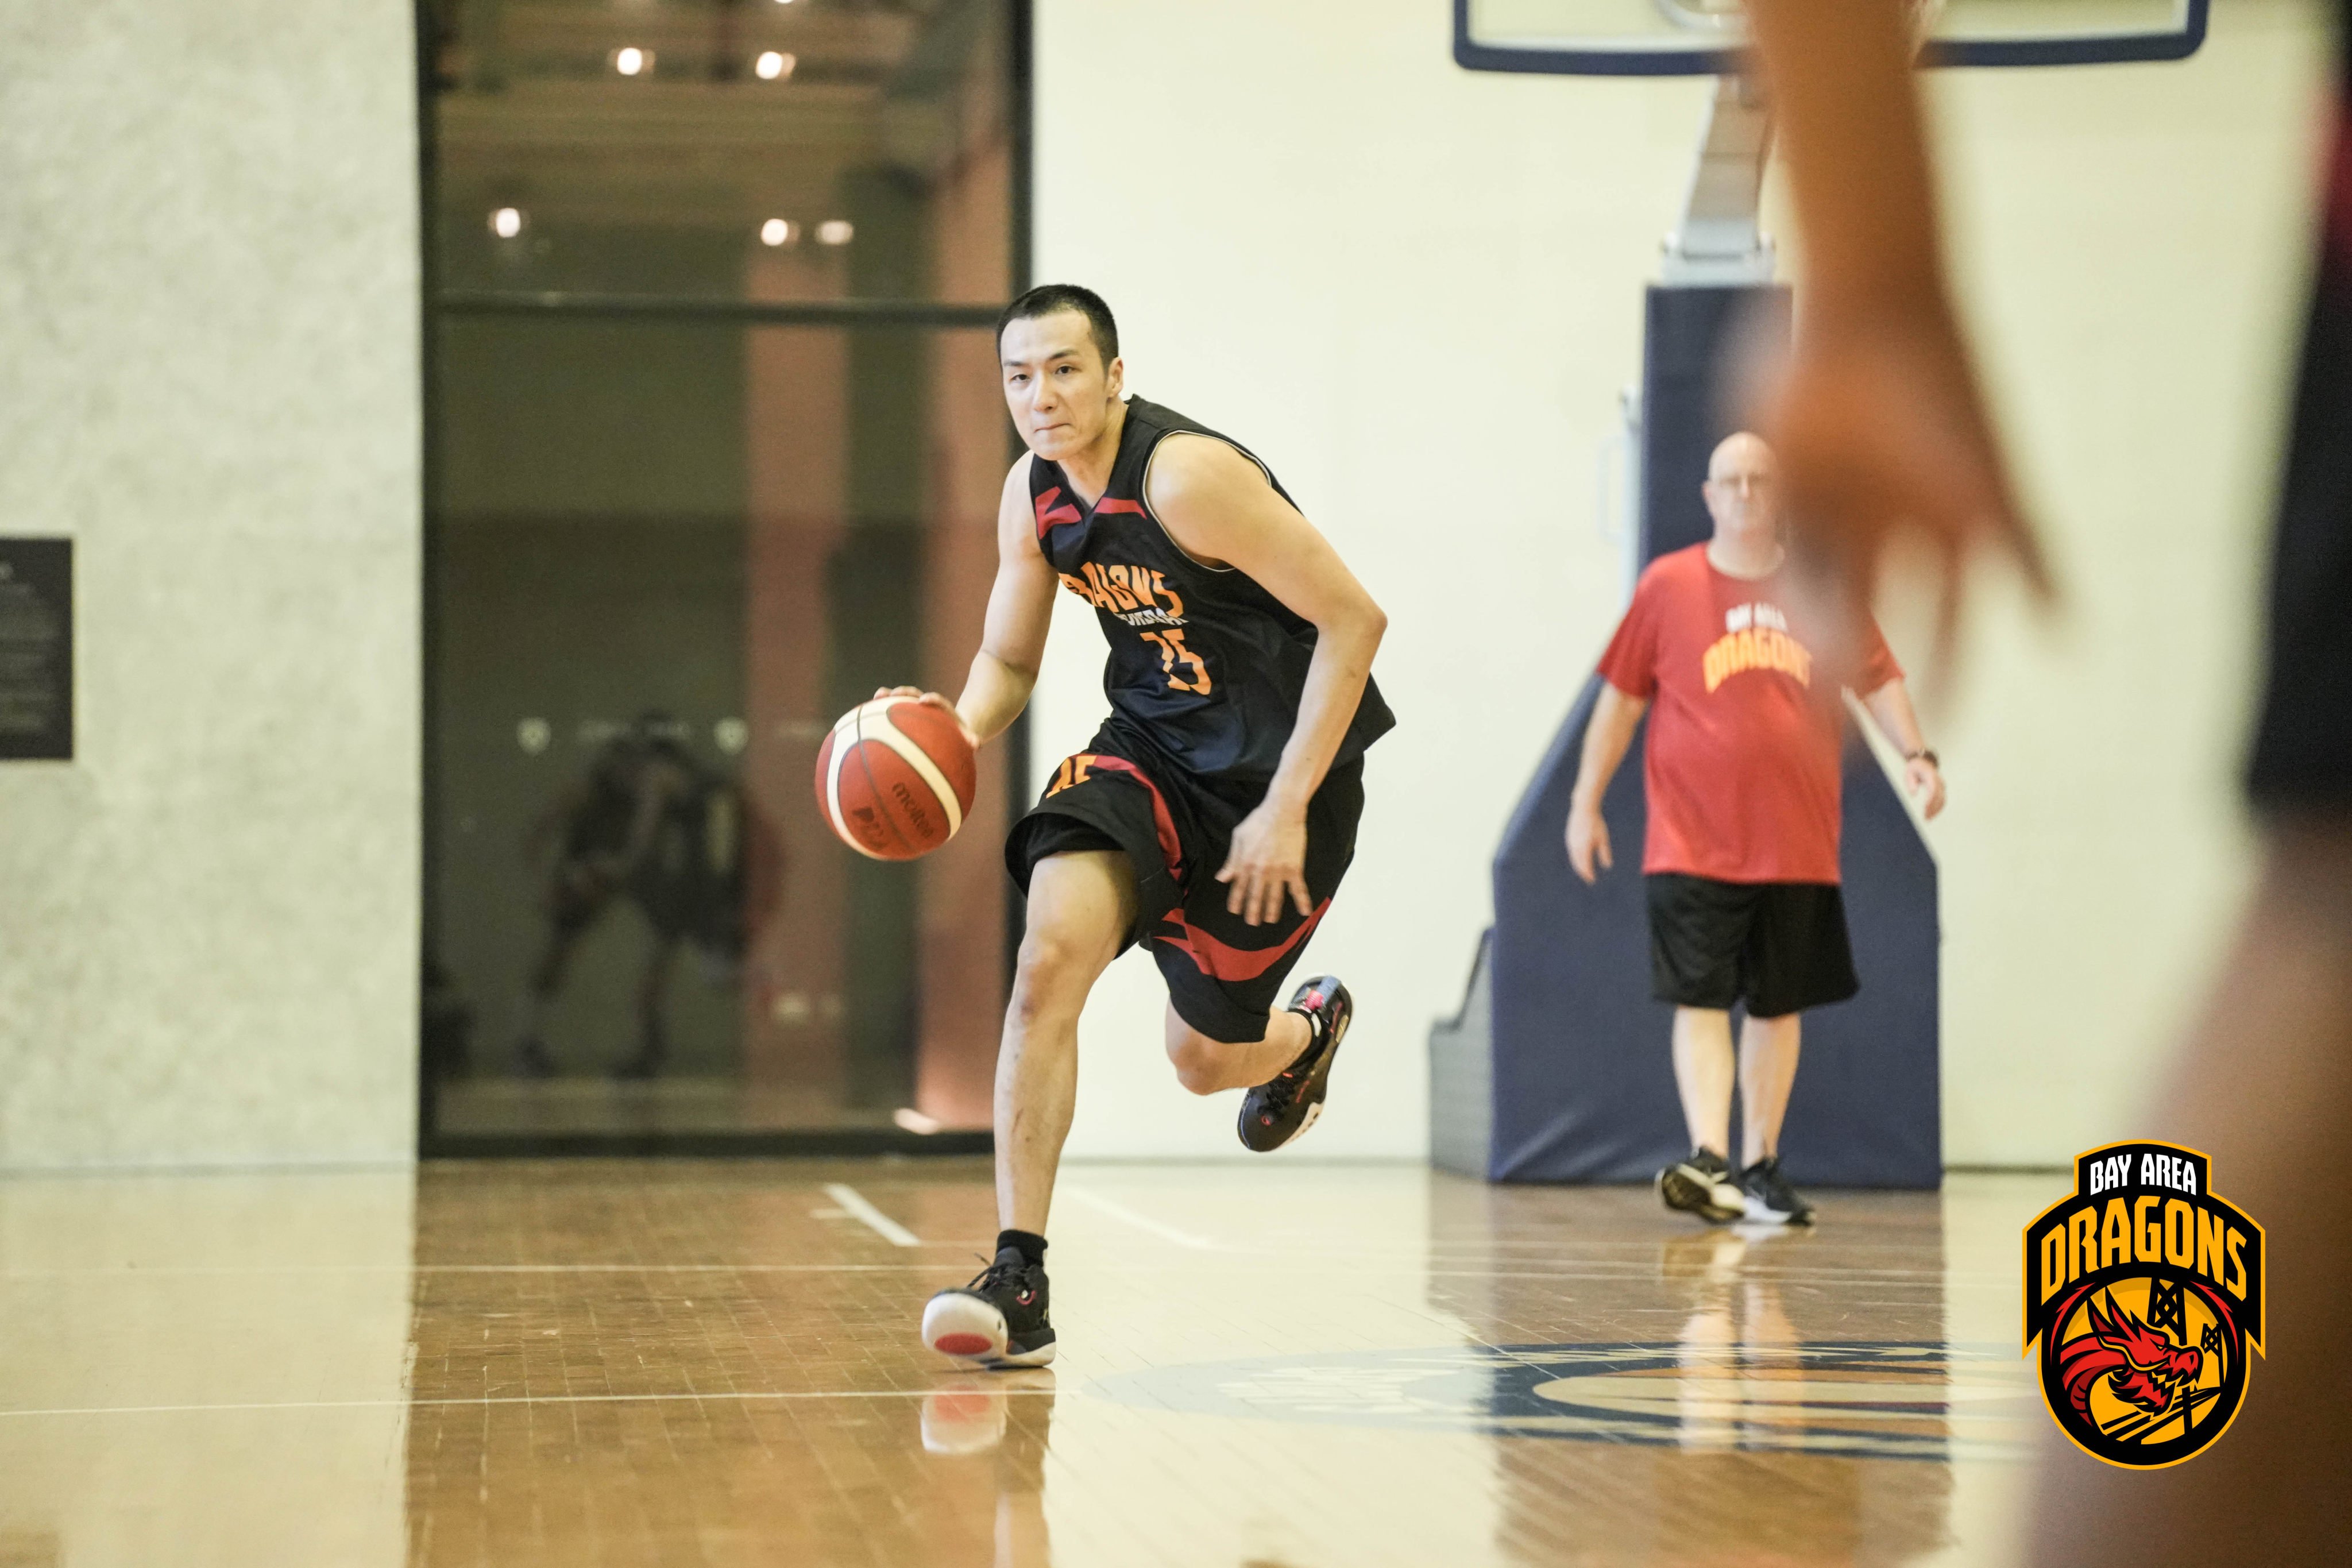 Zheng Qilong is put through his paces during a practice session. Photo: EASL